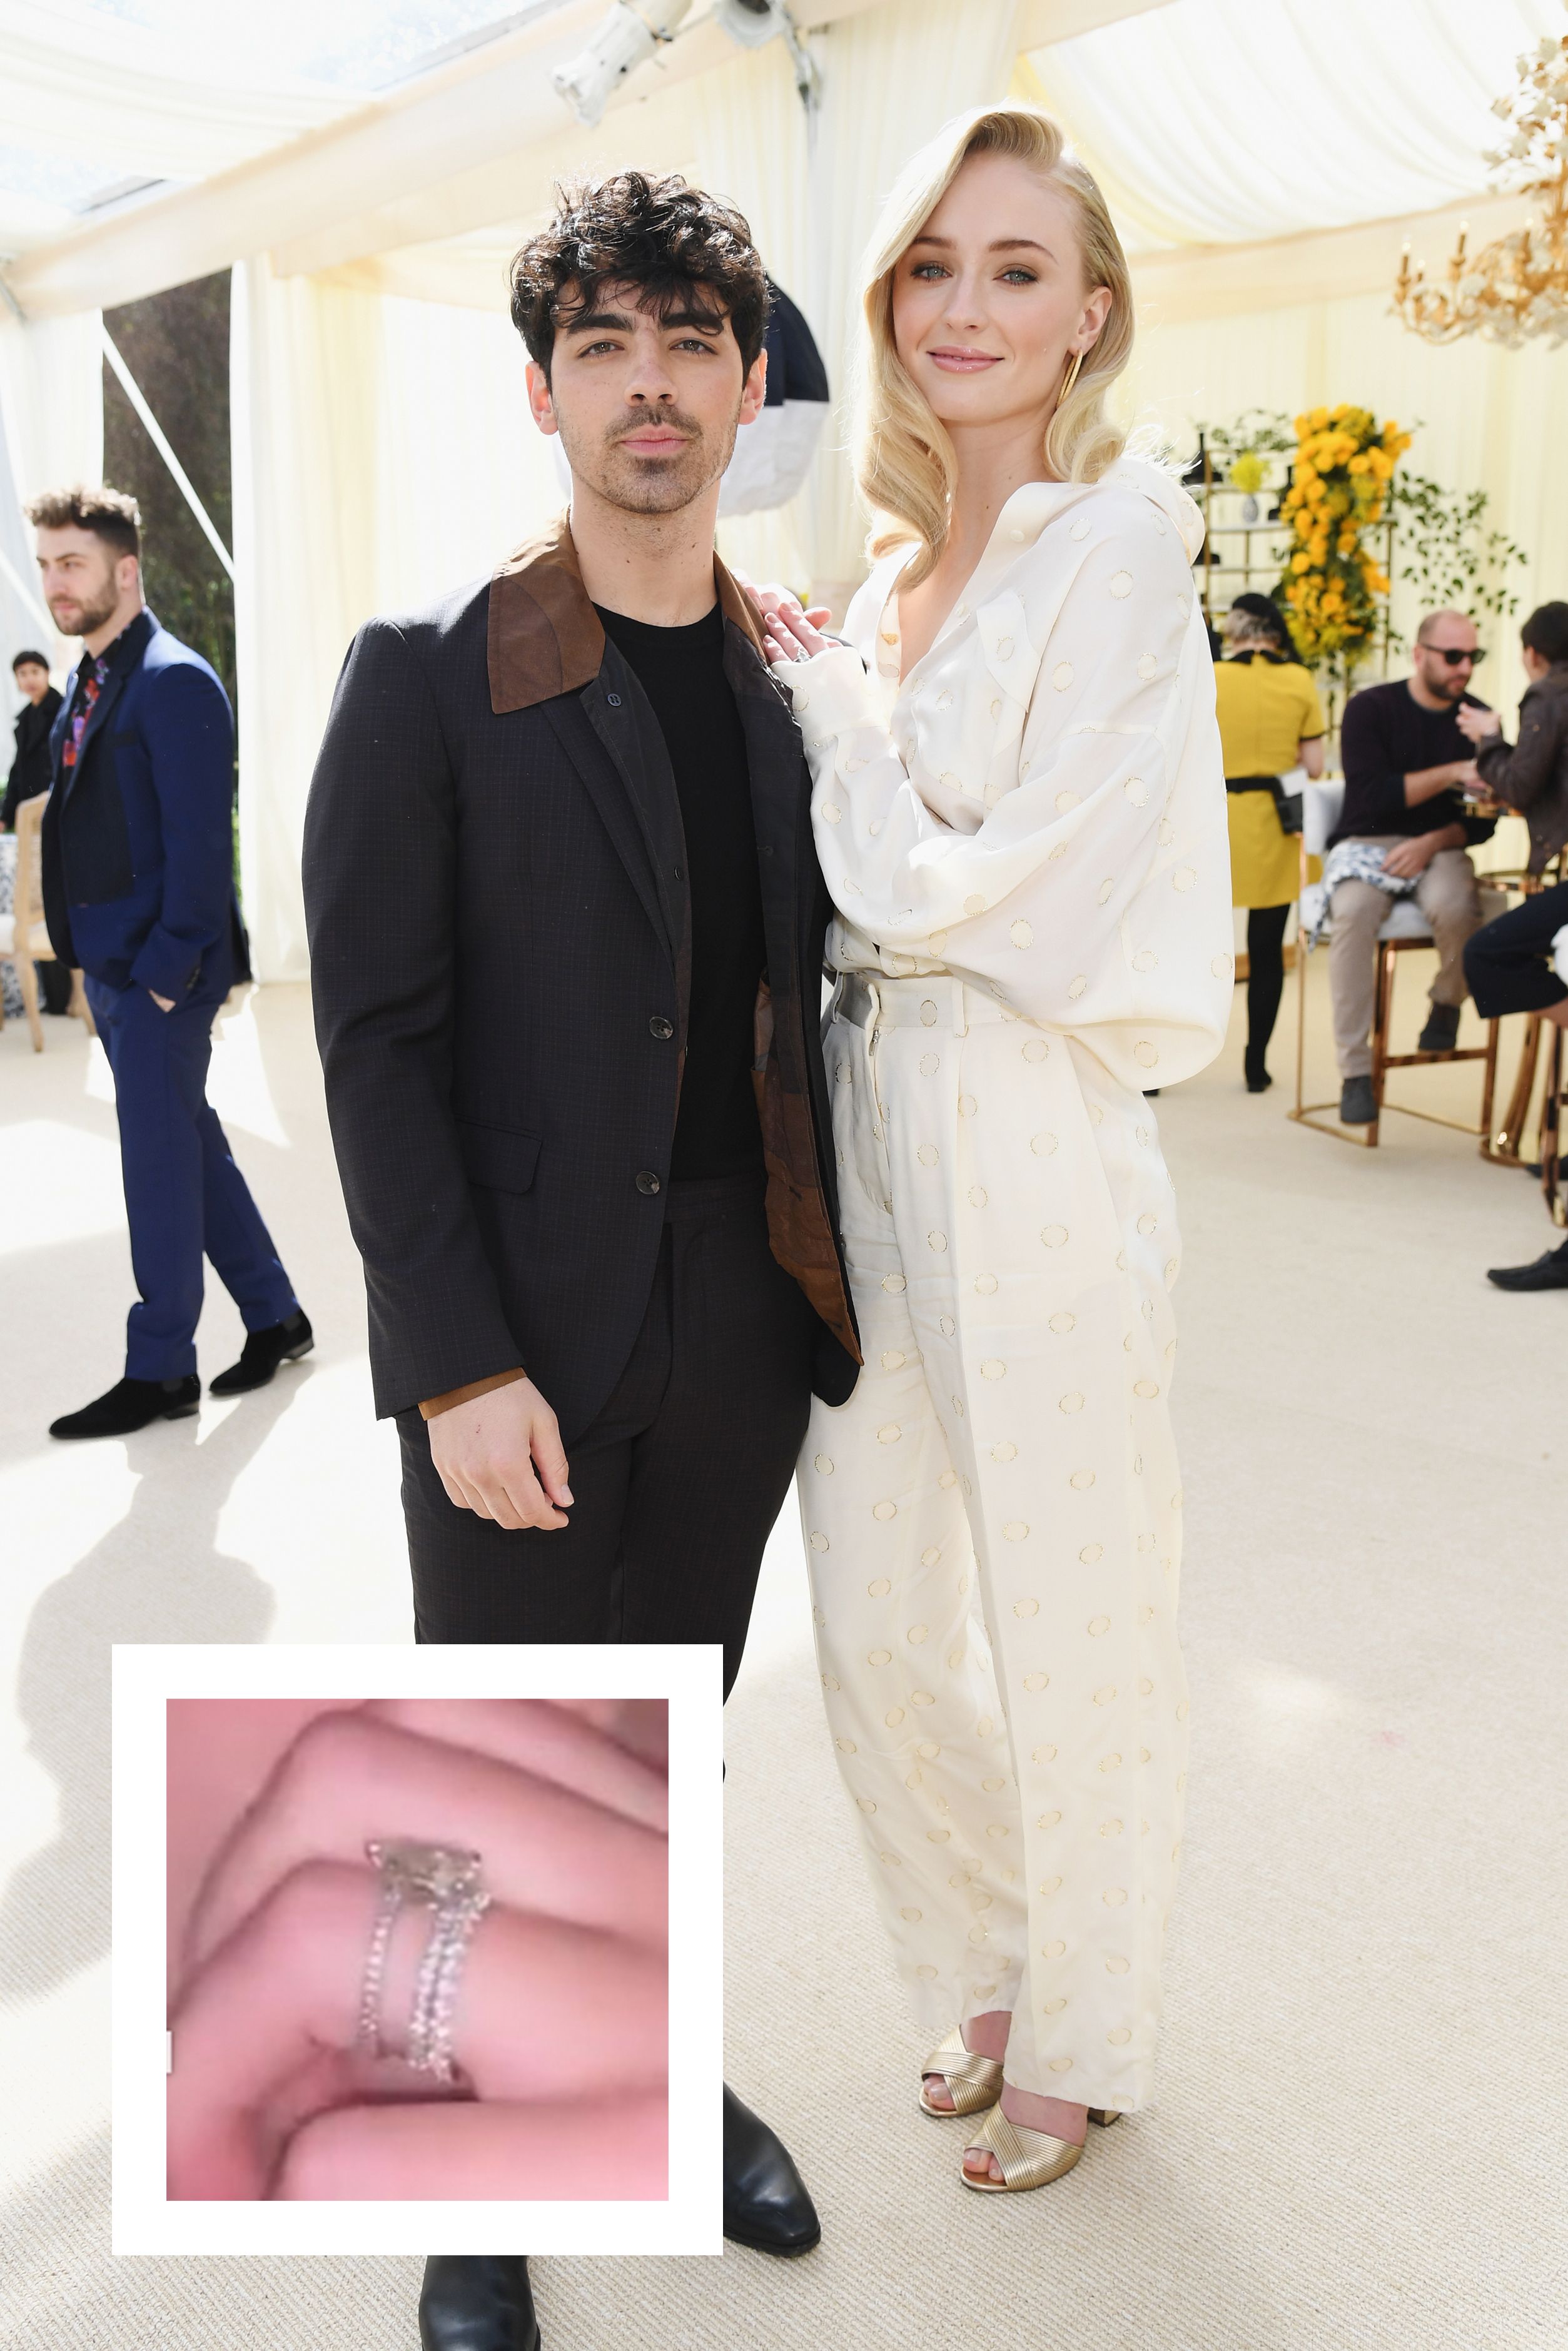 Were you surprised by Joe Jonas filing for divorce from Sophie Turner? -  Quora